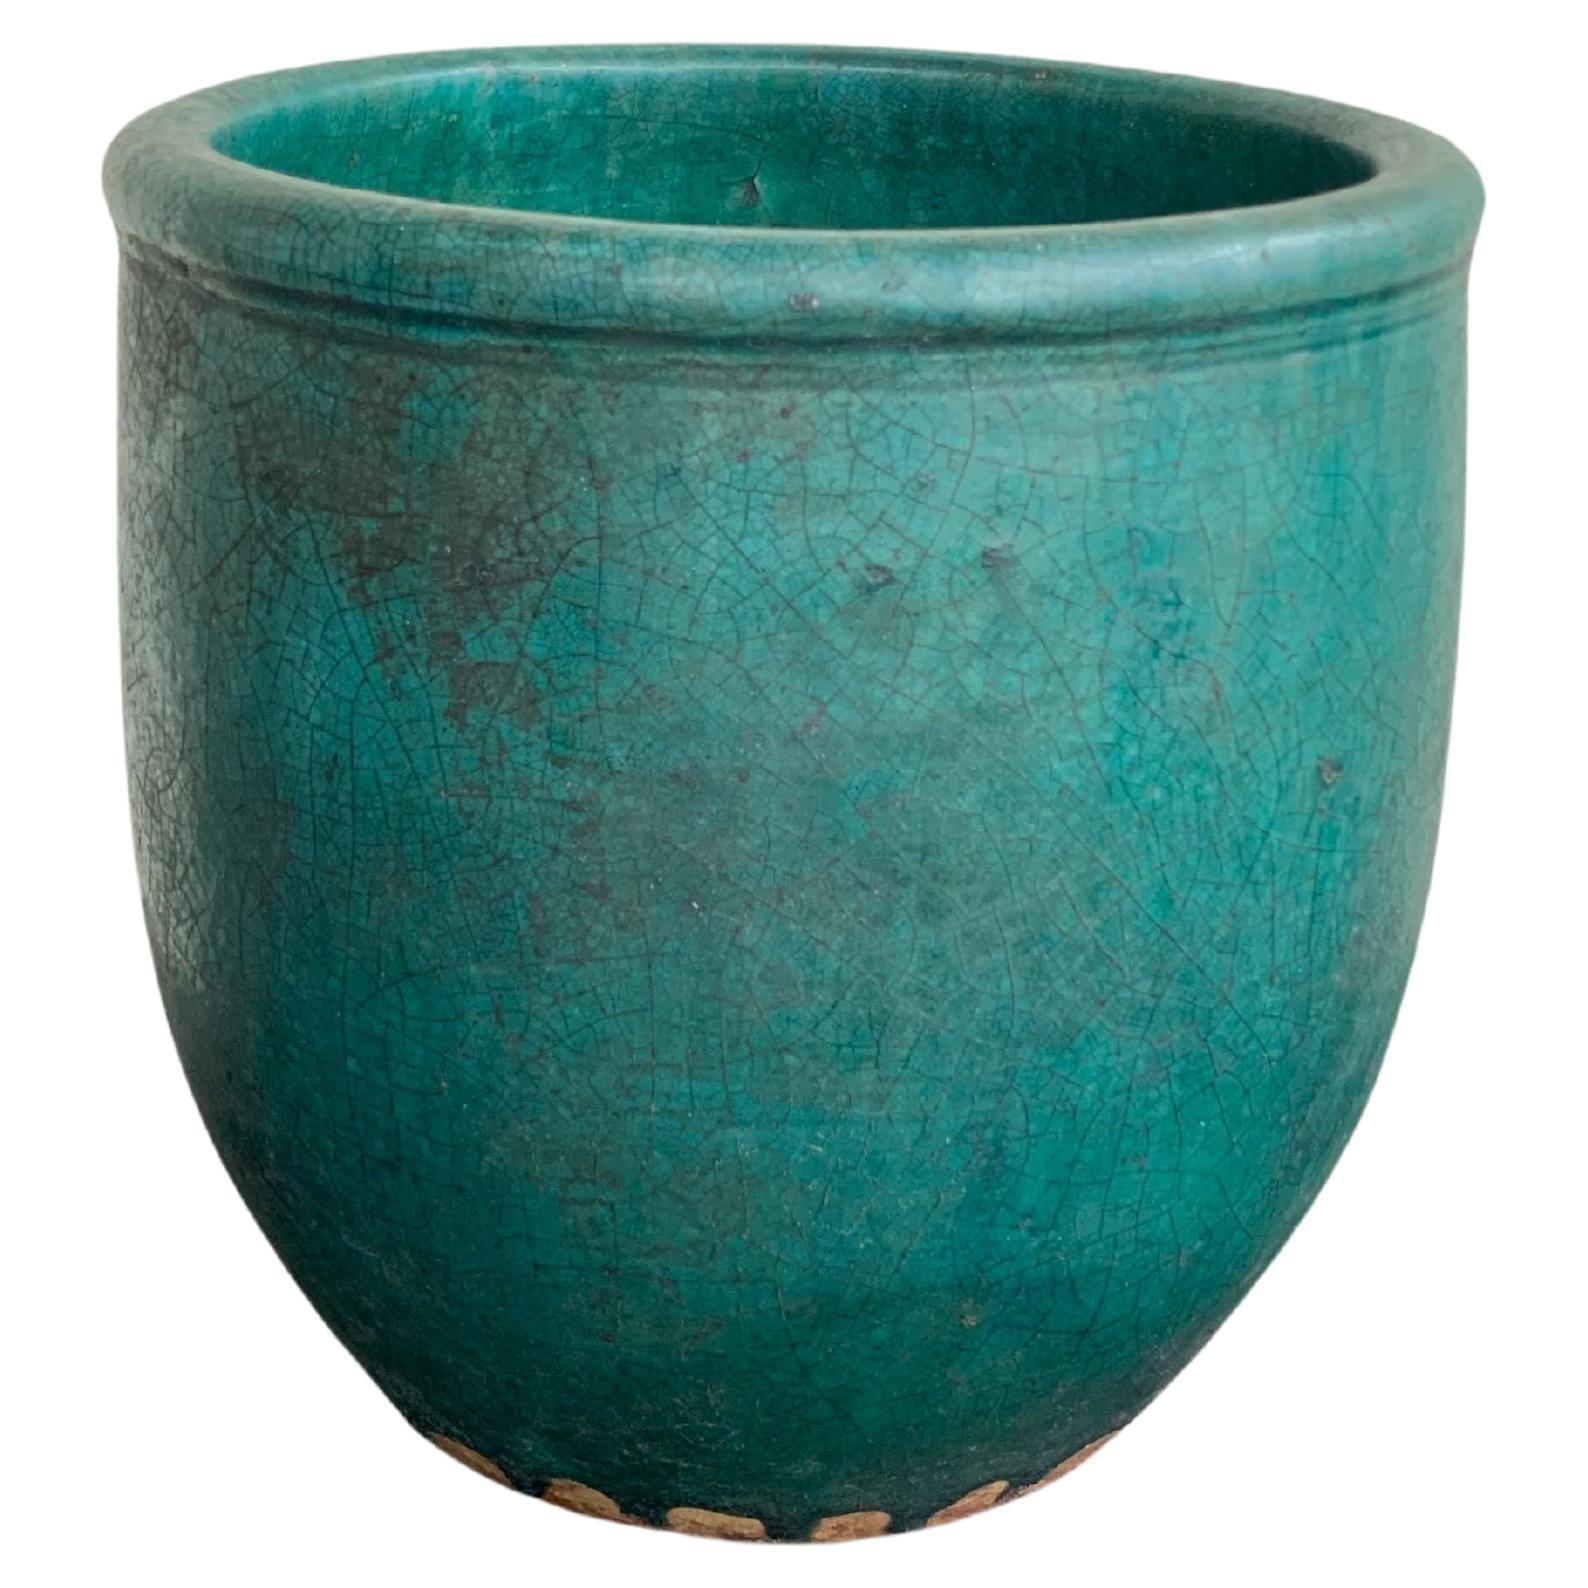 Chinese Green Glazed Jar / Planter, c. 1900 For Sale